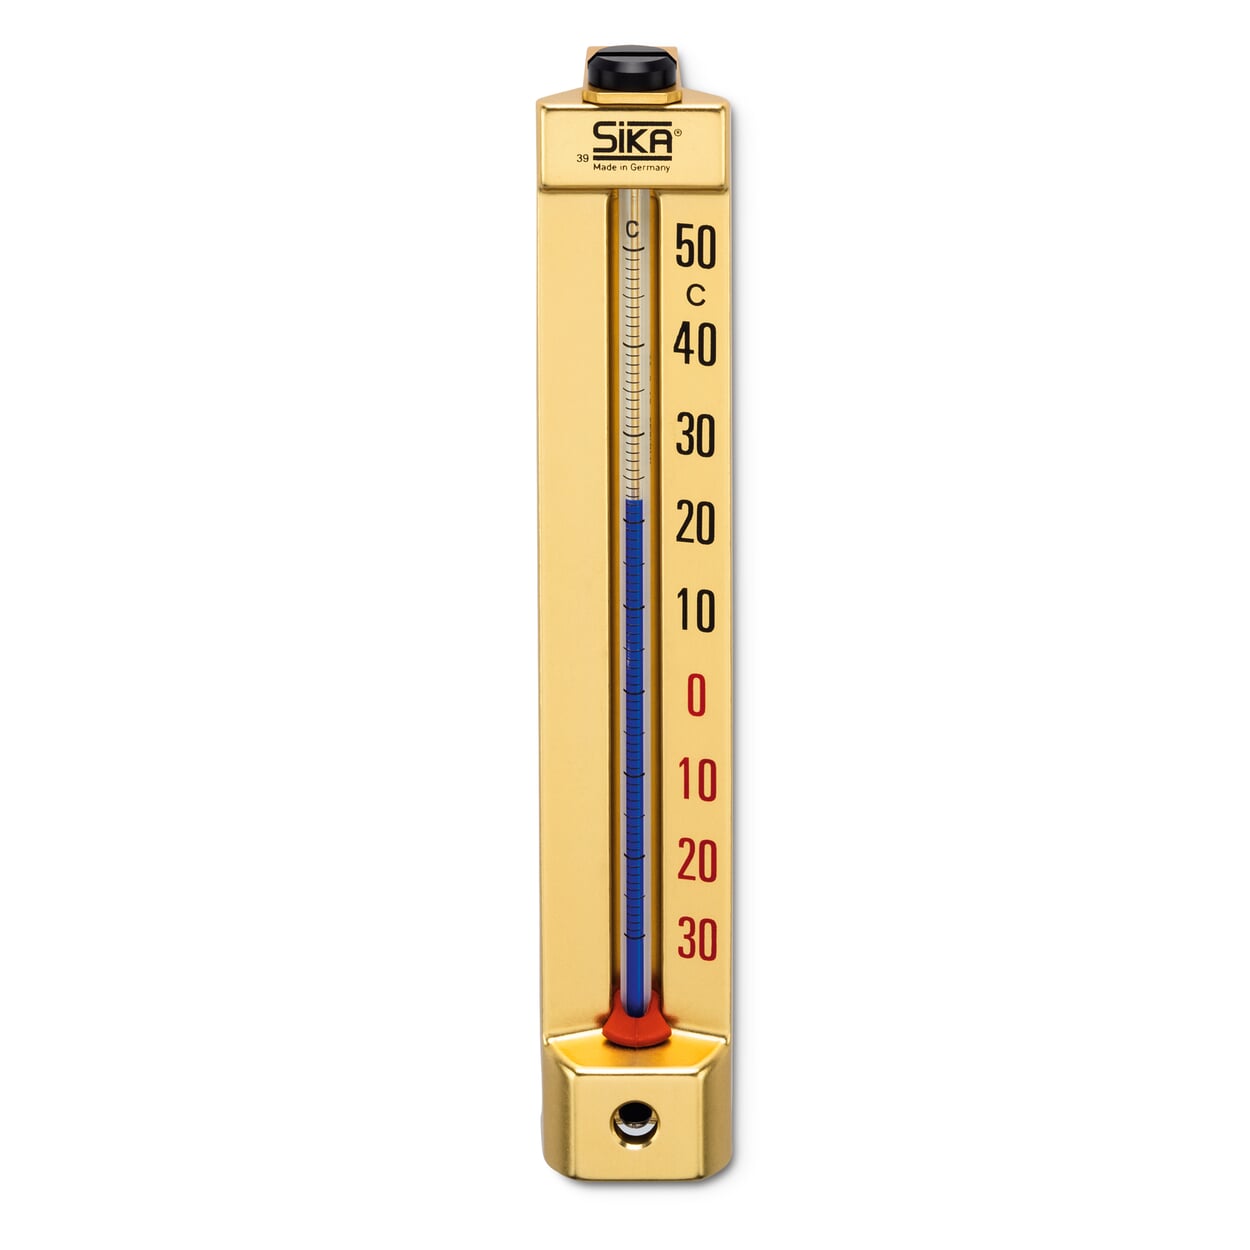 Sika buitenthermometer